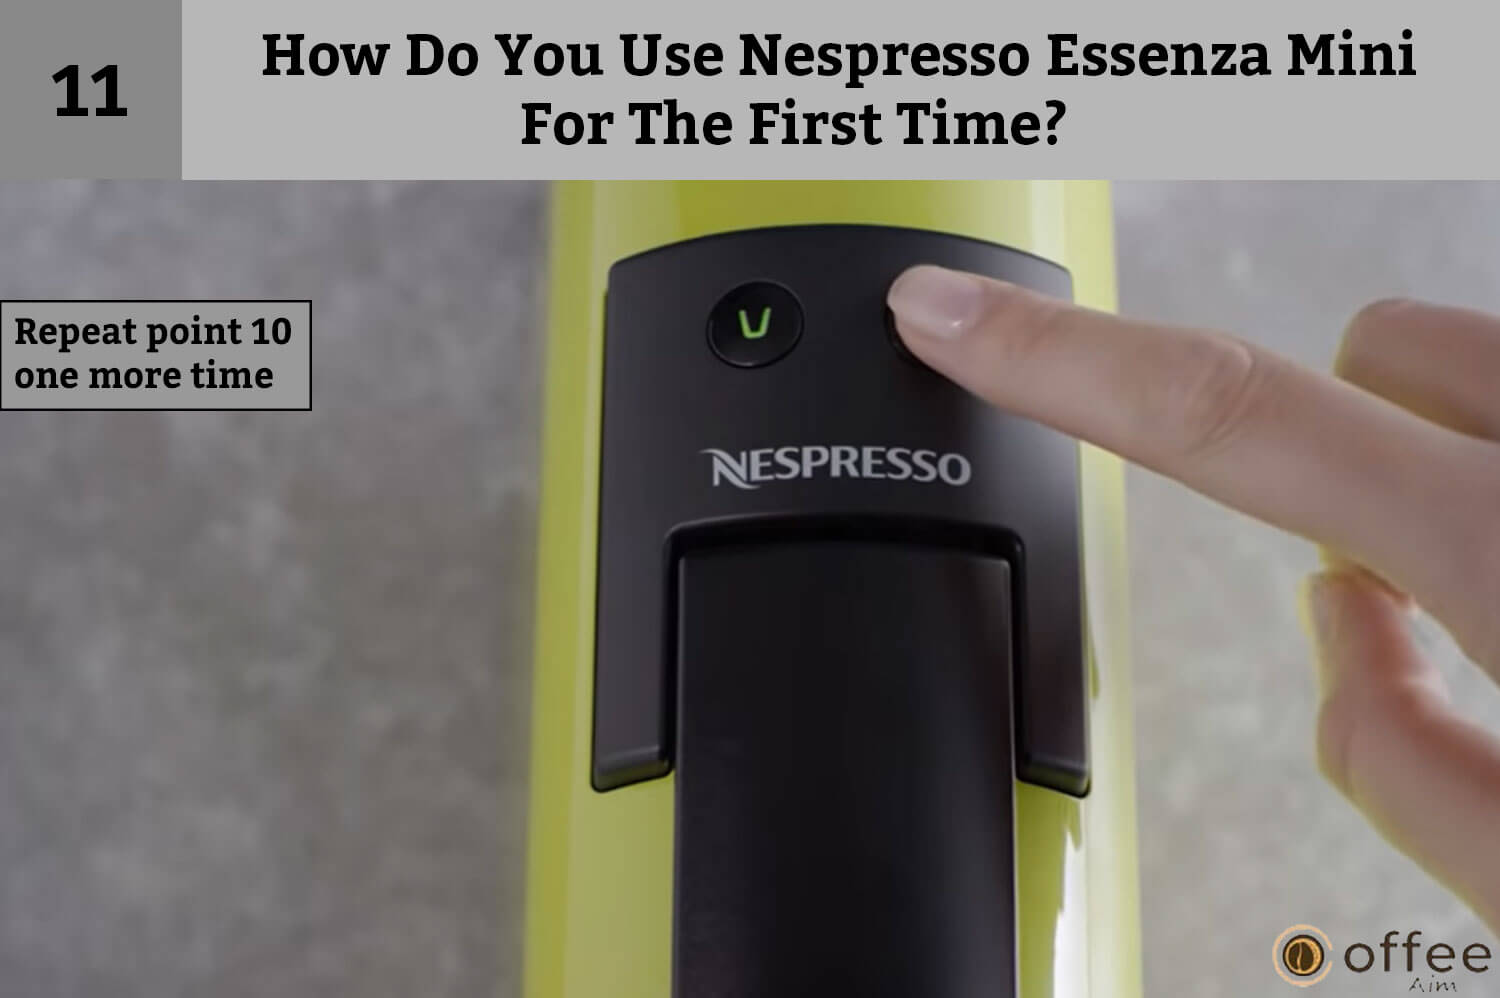 Eleventh instruction of How Do You Use Nespresso Essenza Mini For The First Time? is Repeat point 10 one more time.